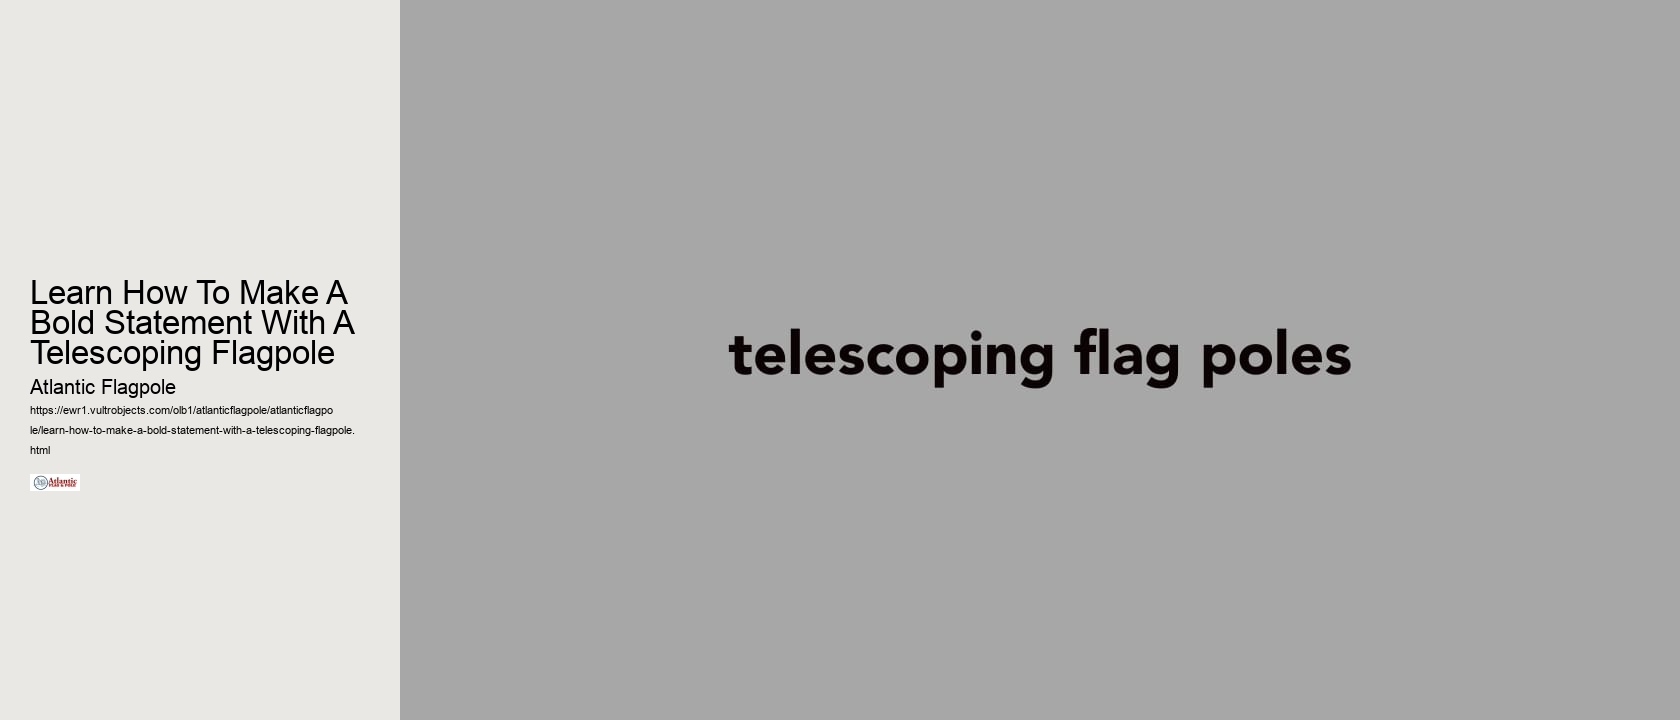 Learn How To Make A Bold Statement With A Telescoping Flagpole